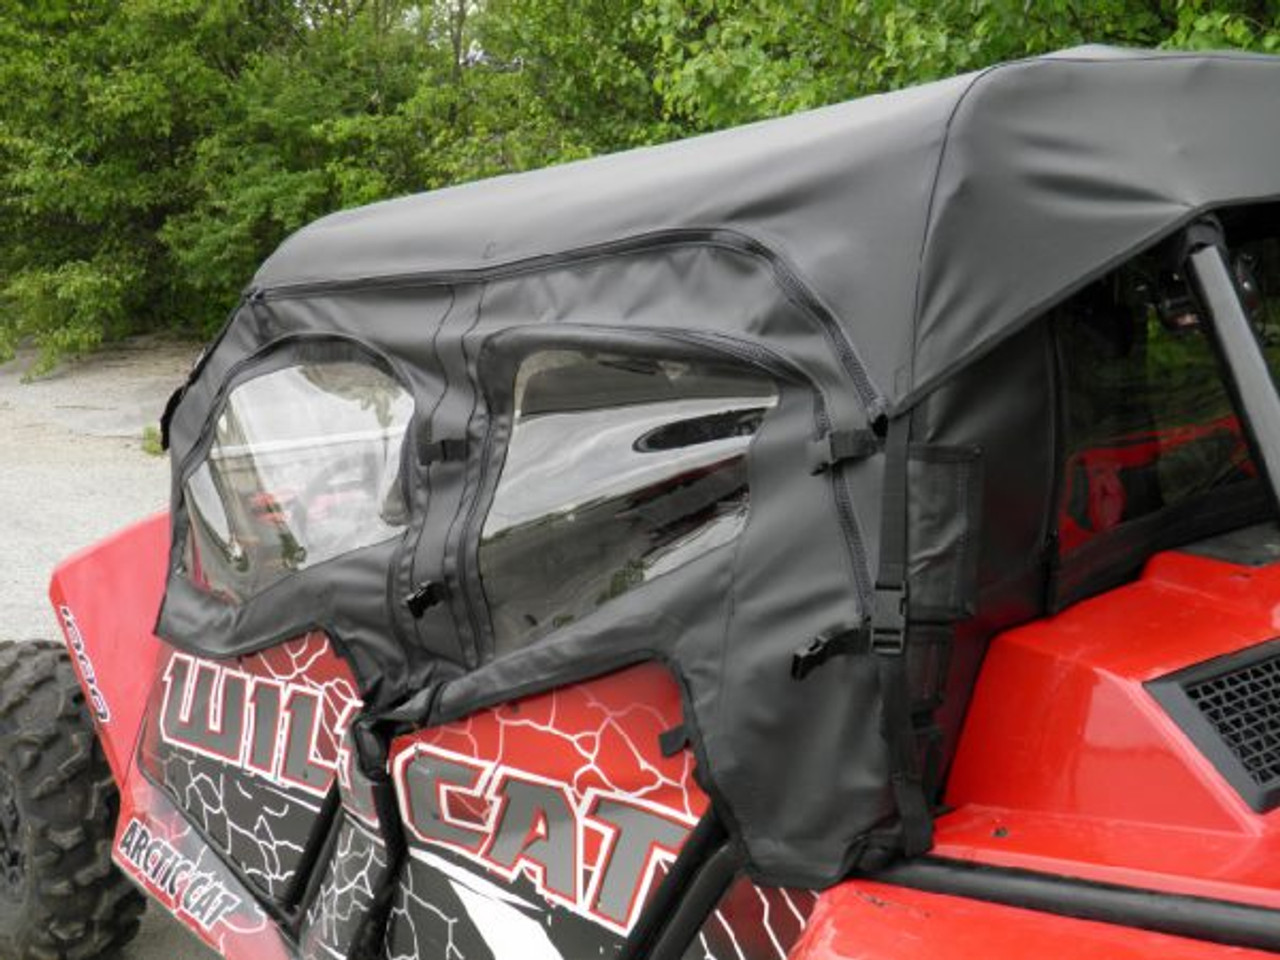 3 Star, side x side, arctic cat, wildcat 4, full cab enclosure side and roof view